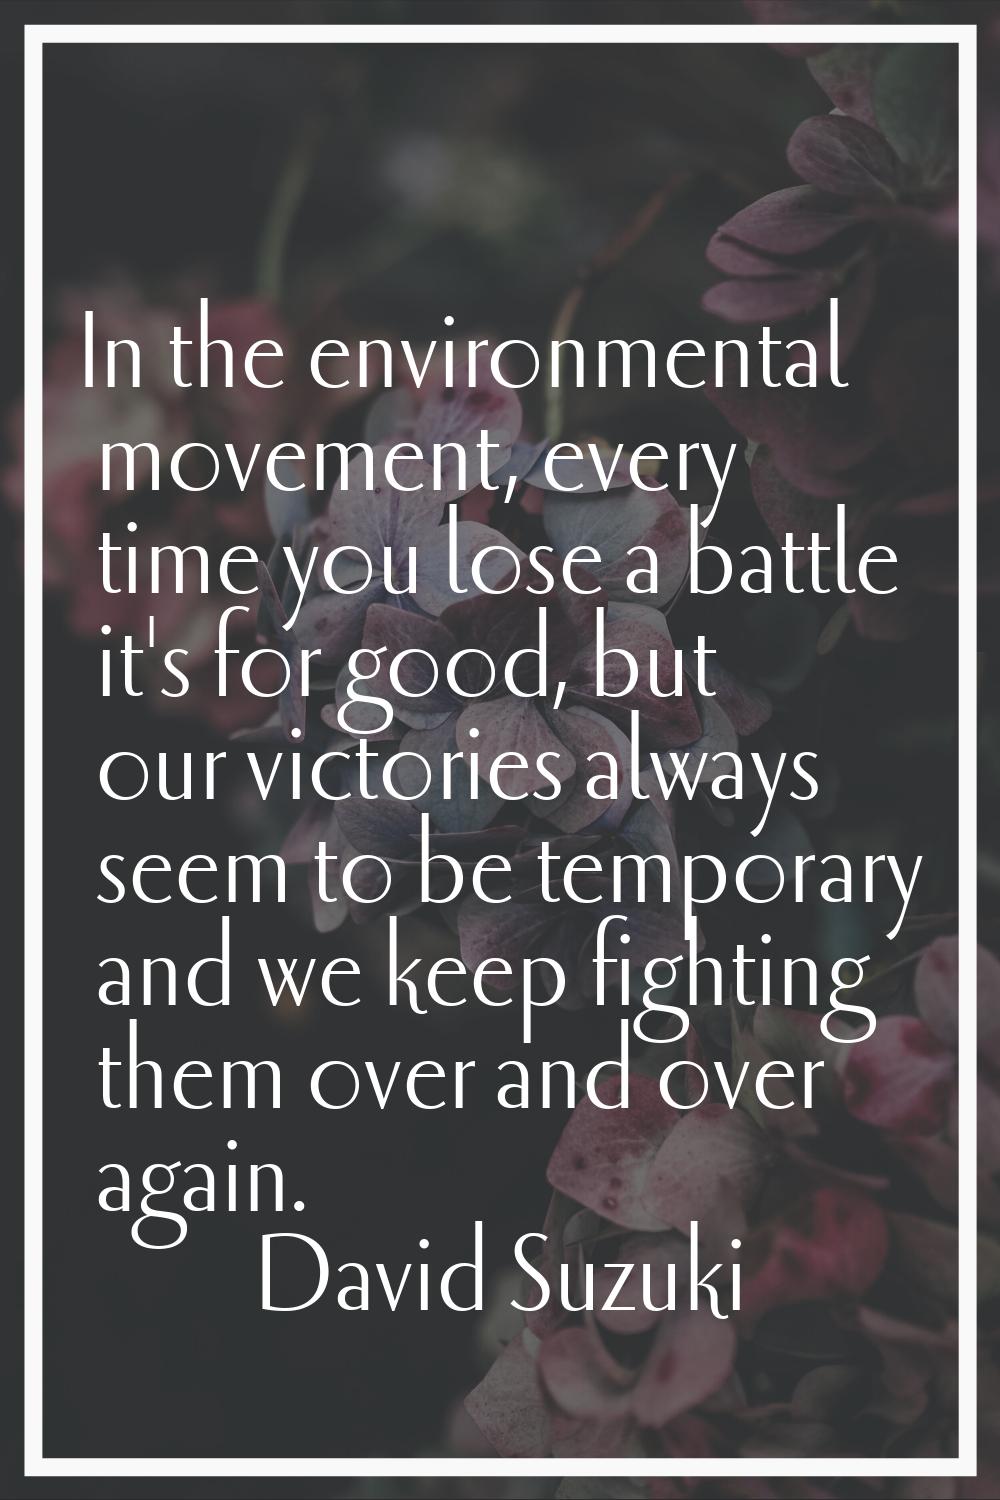 In the environmental movement, every time you lose a battle it's for good, but our victories always